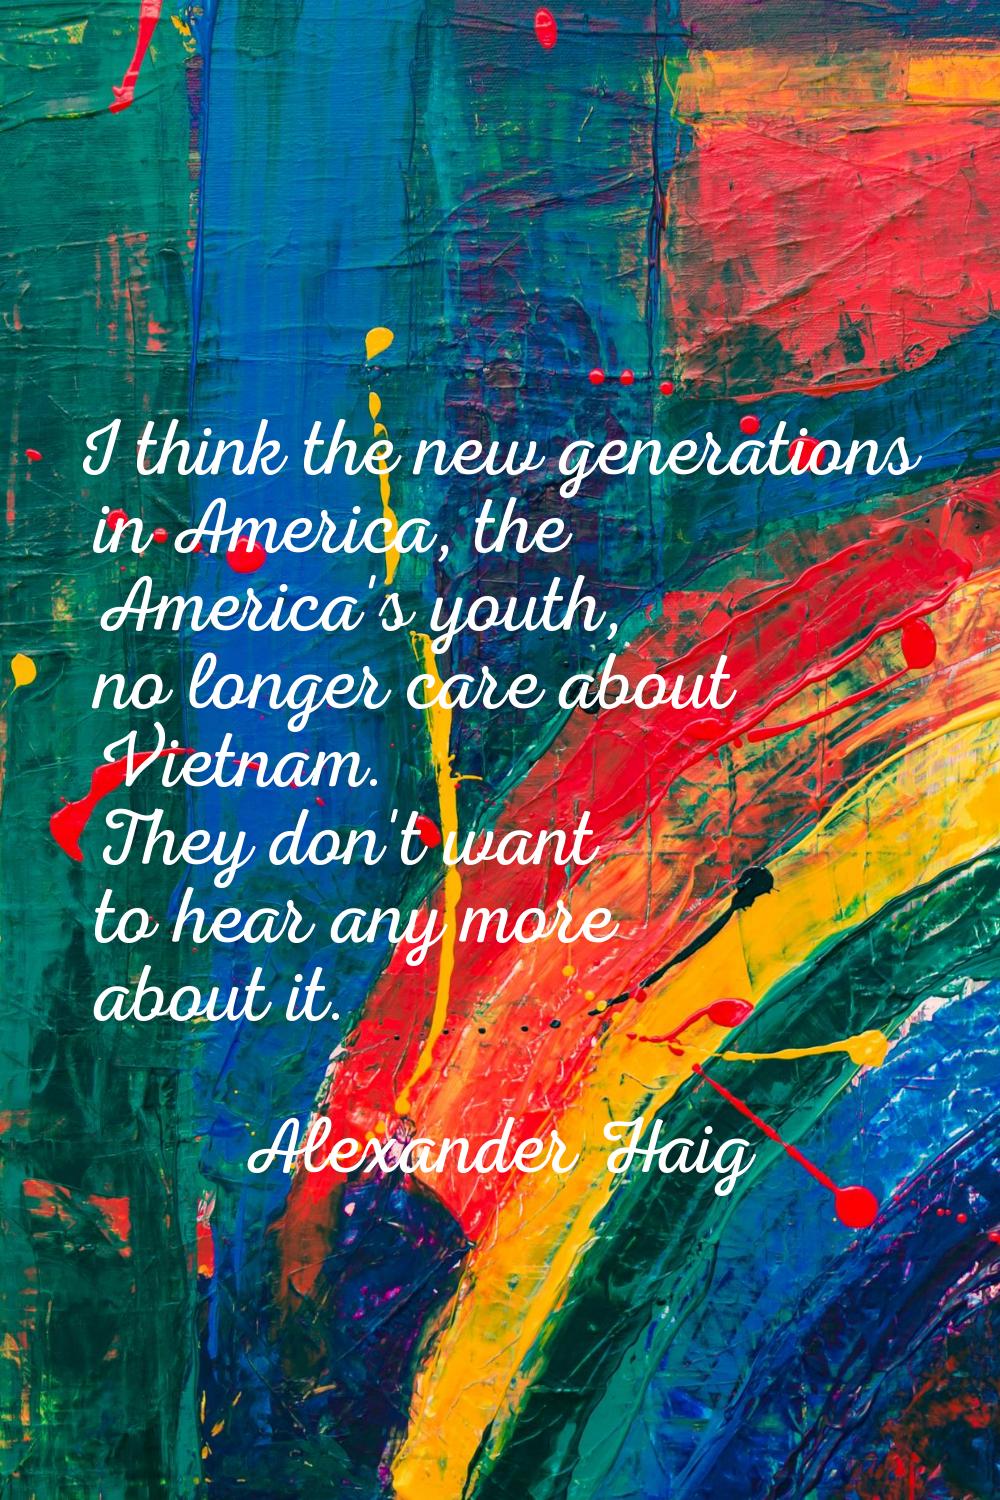 I think the new generations in America, the America's youth, no longer care about Vietnam. They don